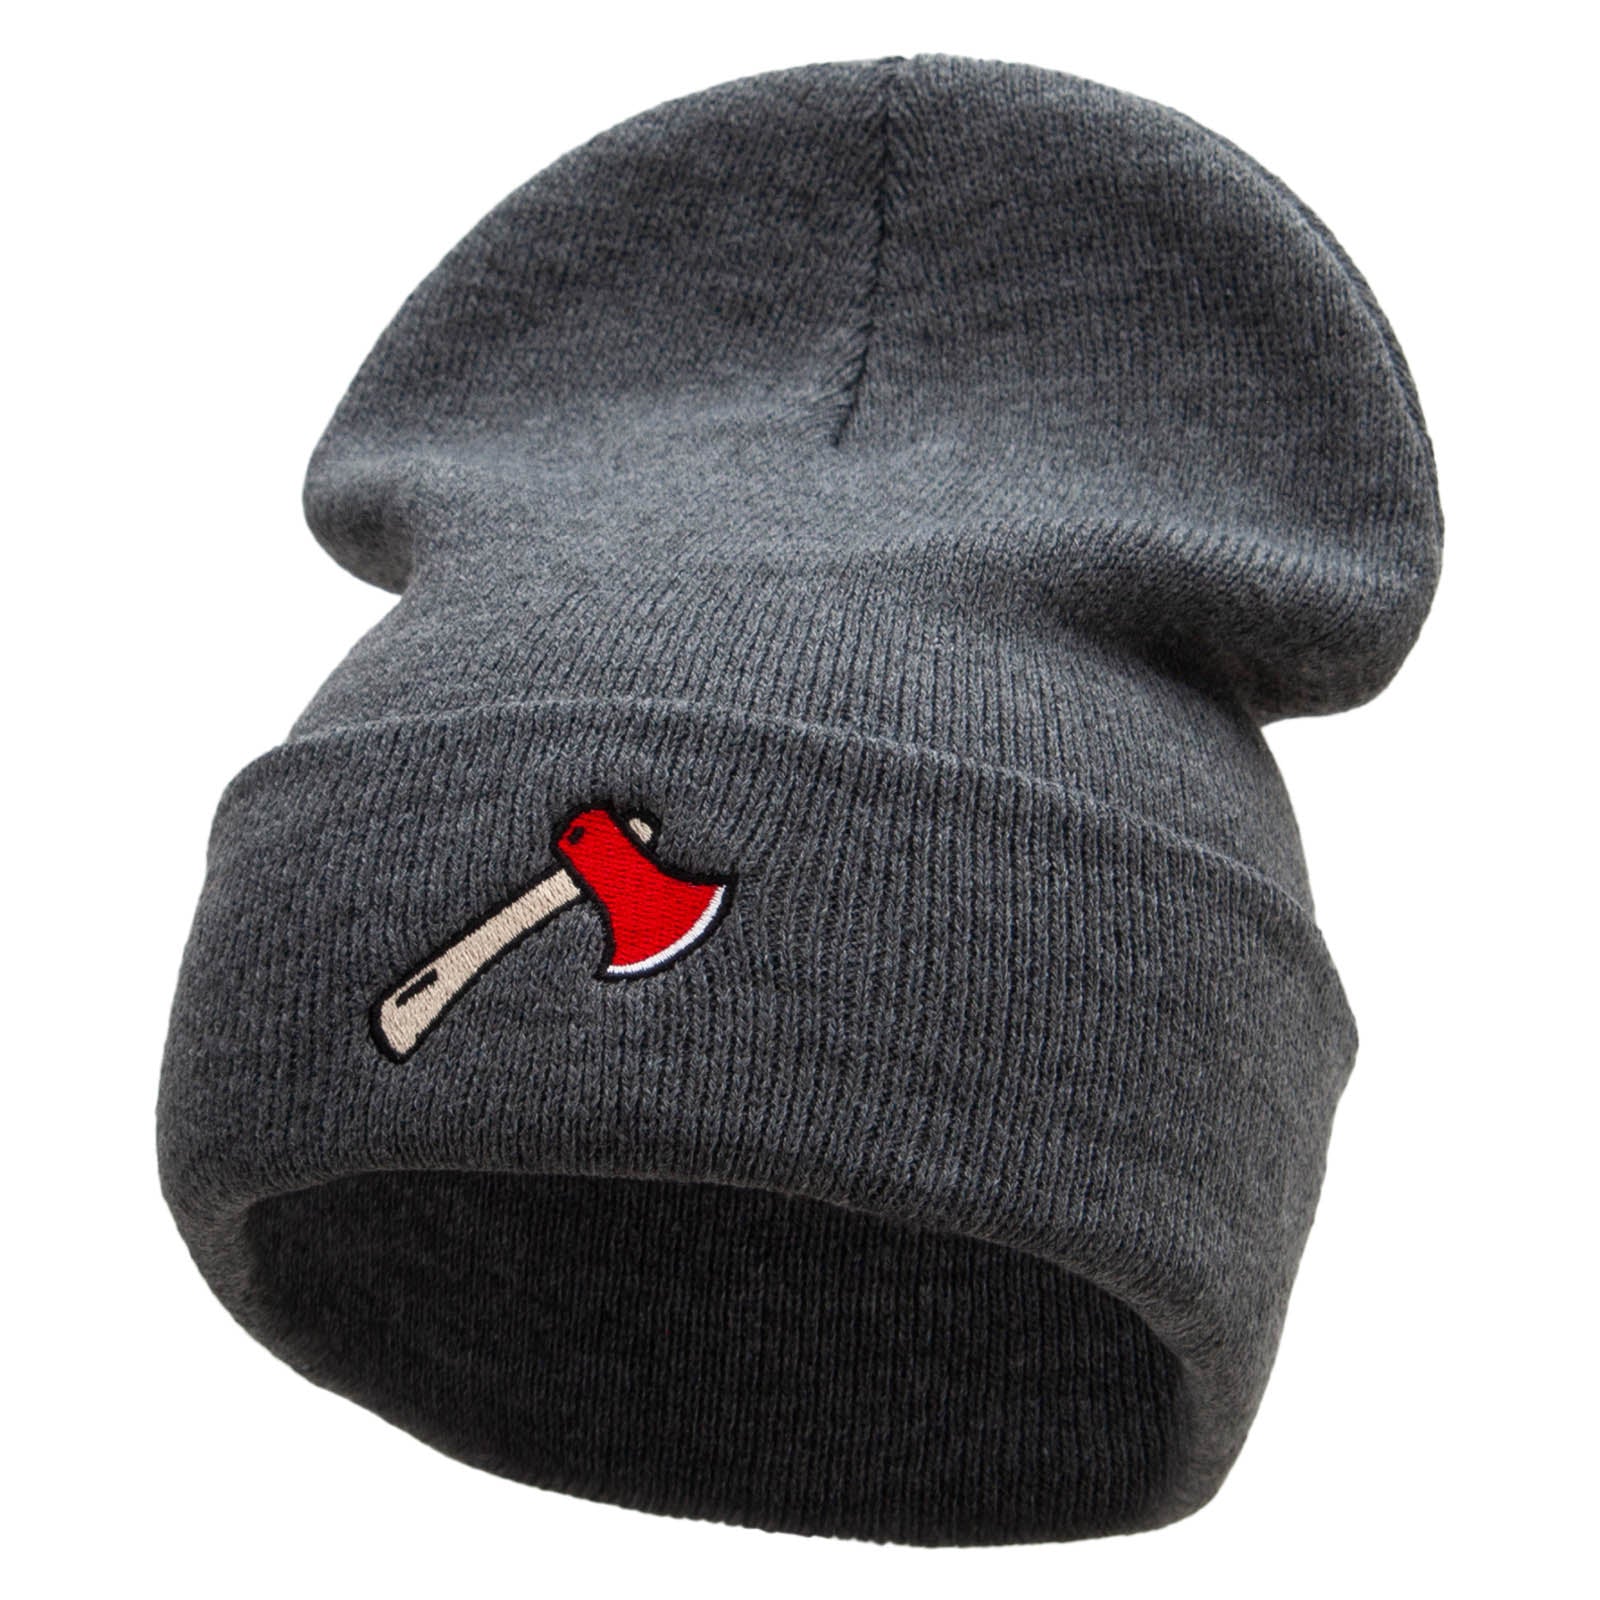 Camping Hatchet Embroidered 12 Inch Long Knitted Beanie - Dk Grey OSFM